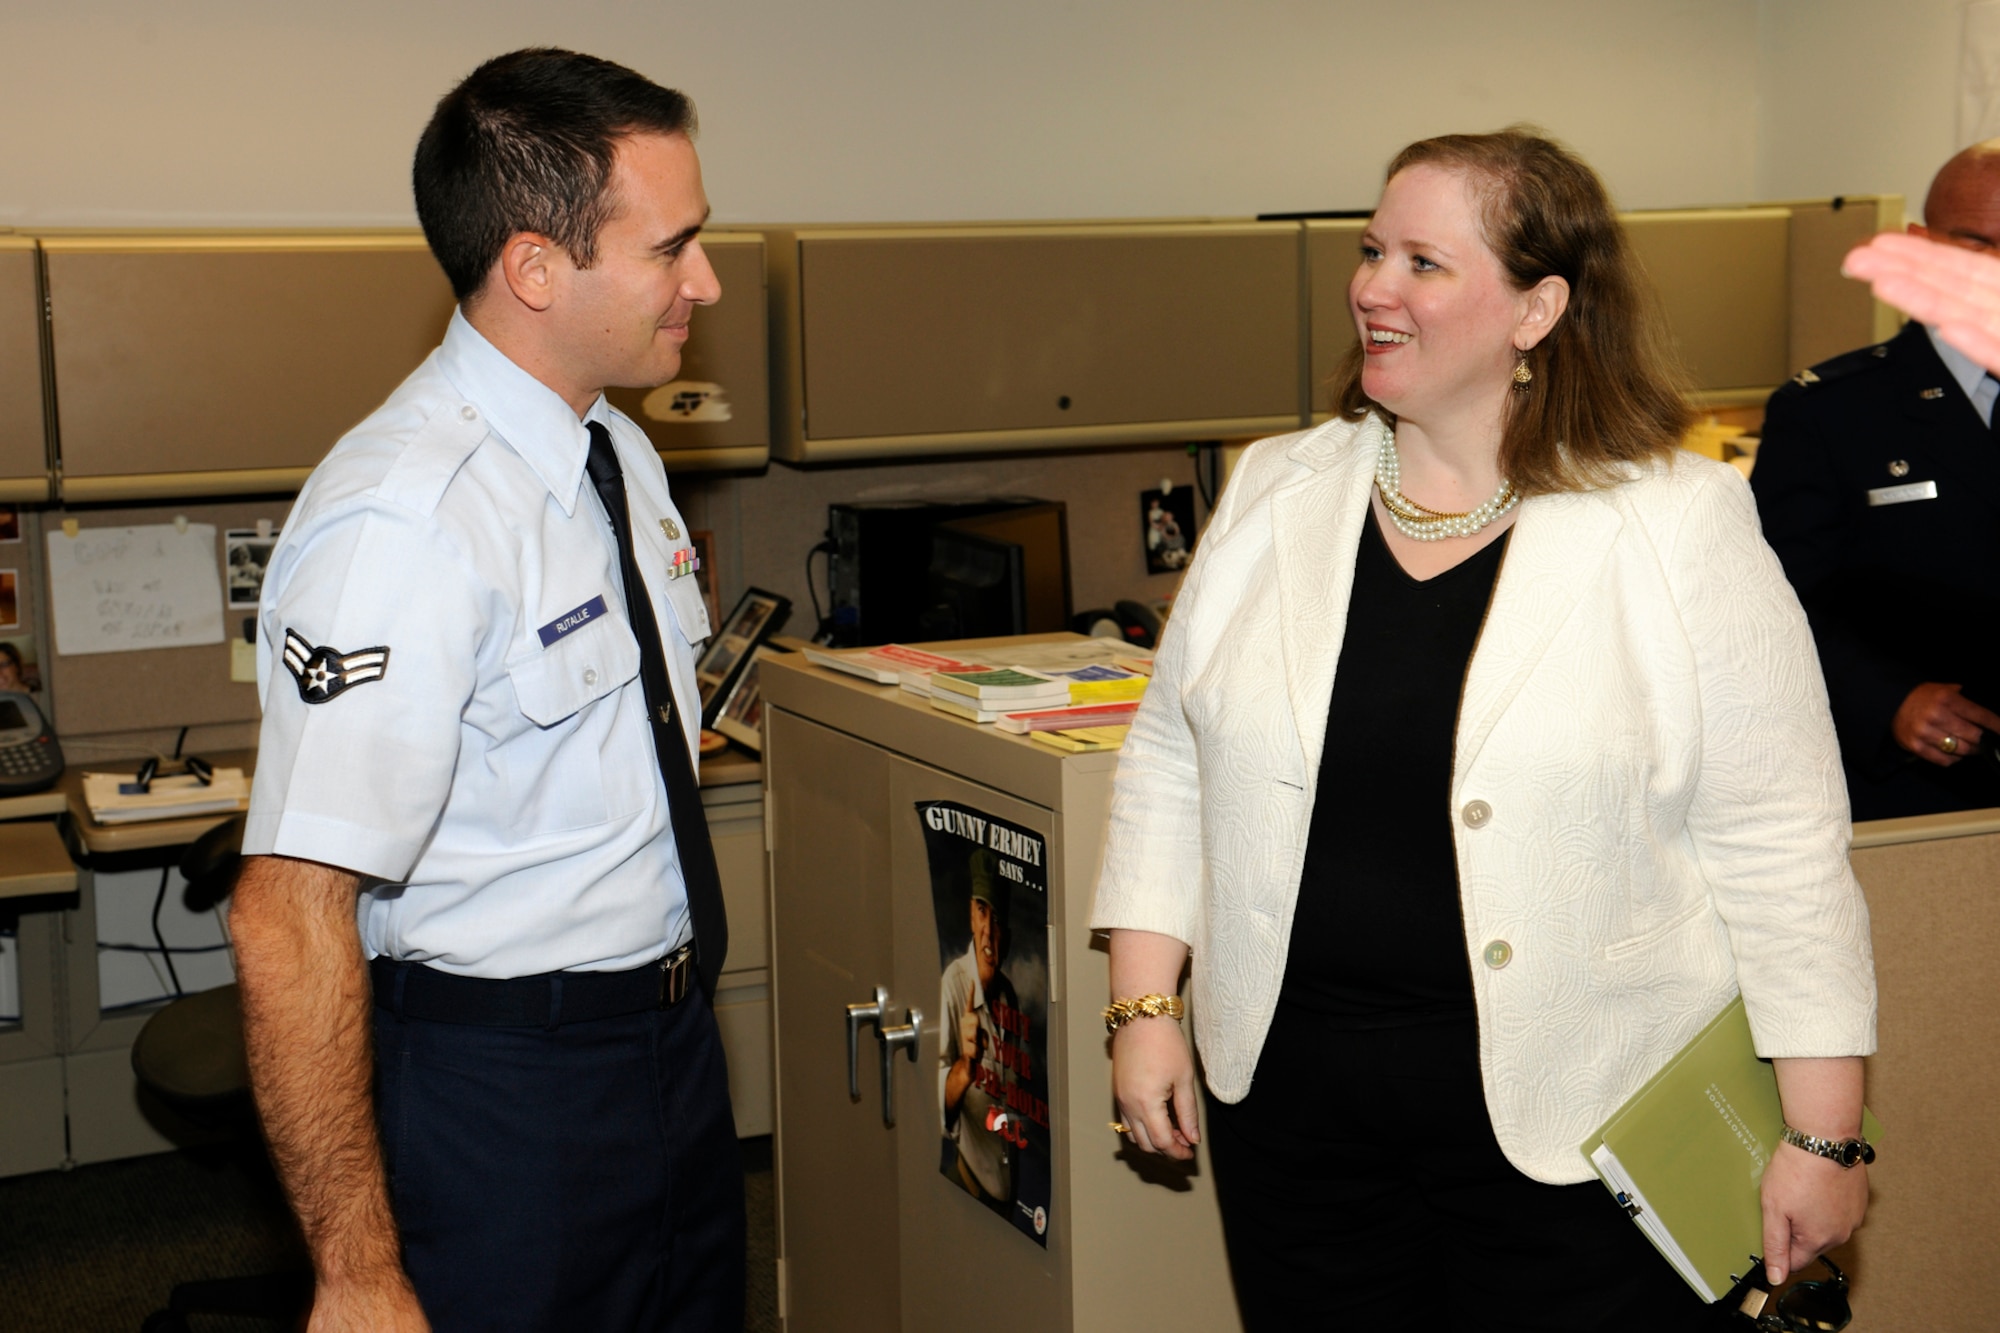 130914-Z-EZ686-046 – Airman 1st Class Michael Rutallie, 127th Communications Squadron, talks with Ms. Erin Conaton, vice-chair of the National Commission of the Structure of the Air Force, during a visit by members of the commission to Selfridge Air National Guard Base, Mich., Sept. 14, 2013. During the visit, members of the commission visited with Airmen and took testimony about Air National Guard operations. (U.S. Air National Guard photo by MSgt. David Kujawa/Released)